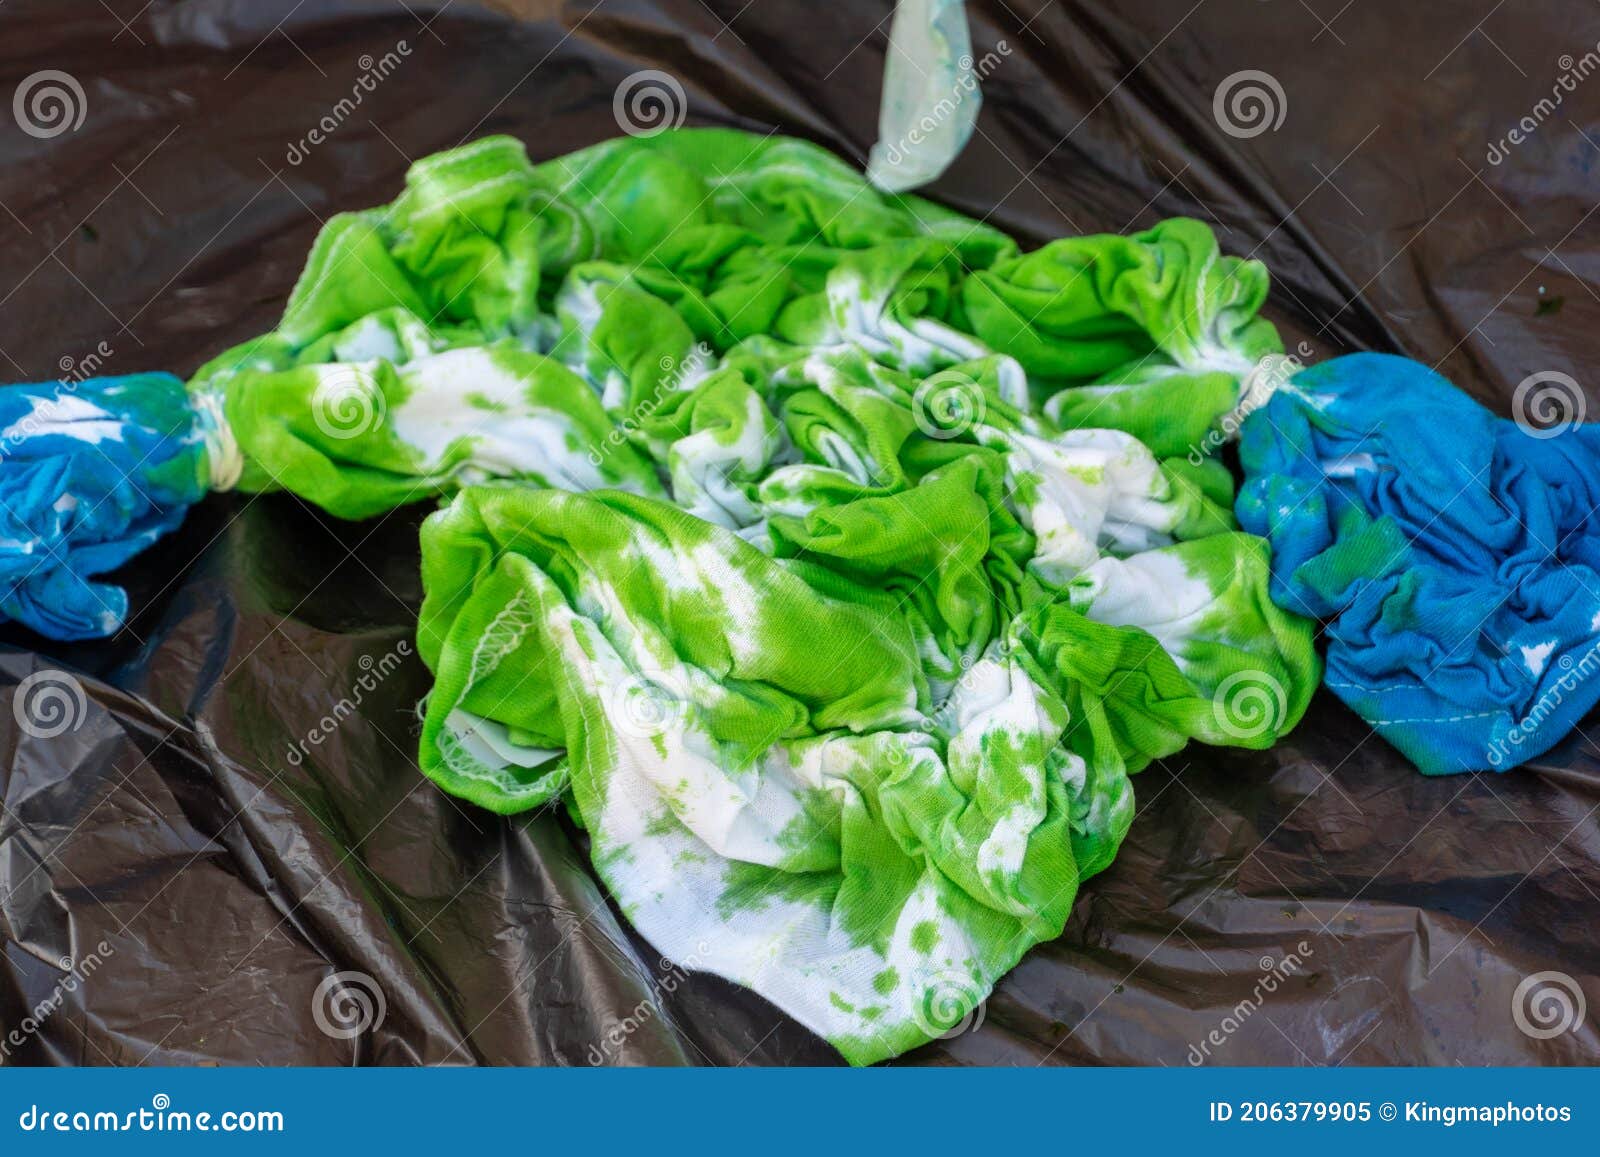 squished green and blue tie dye shirt with wet dye for children`s creative and artistic 